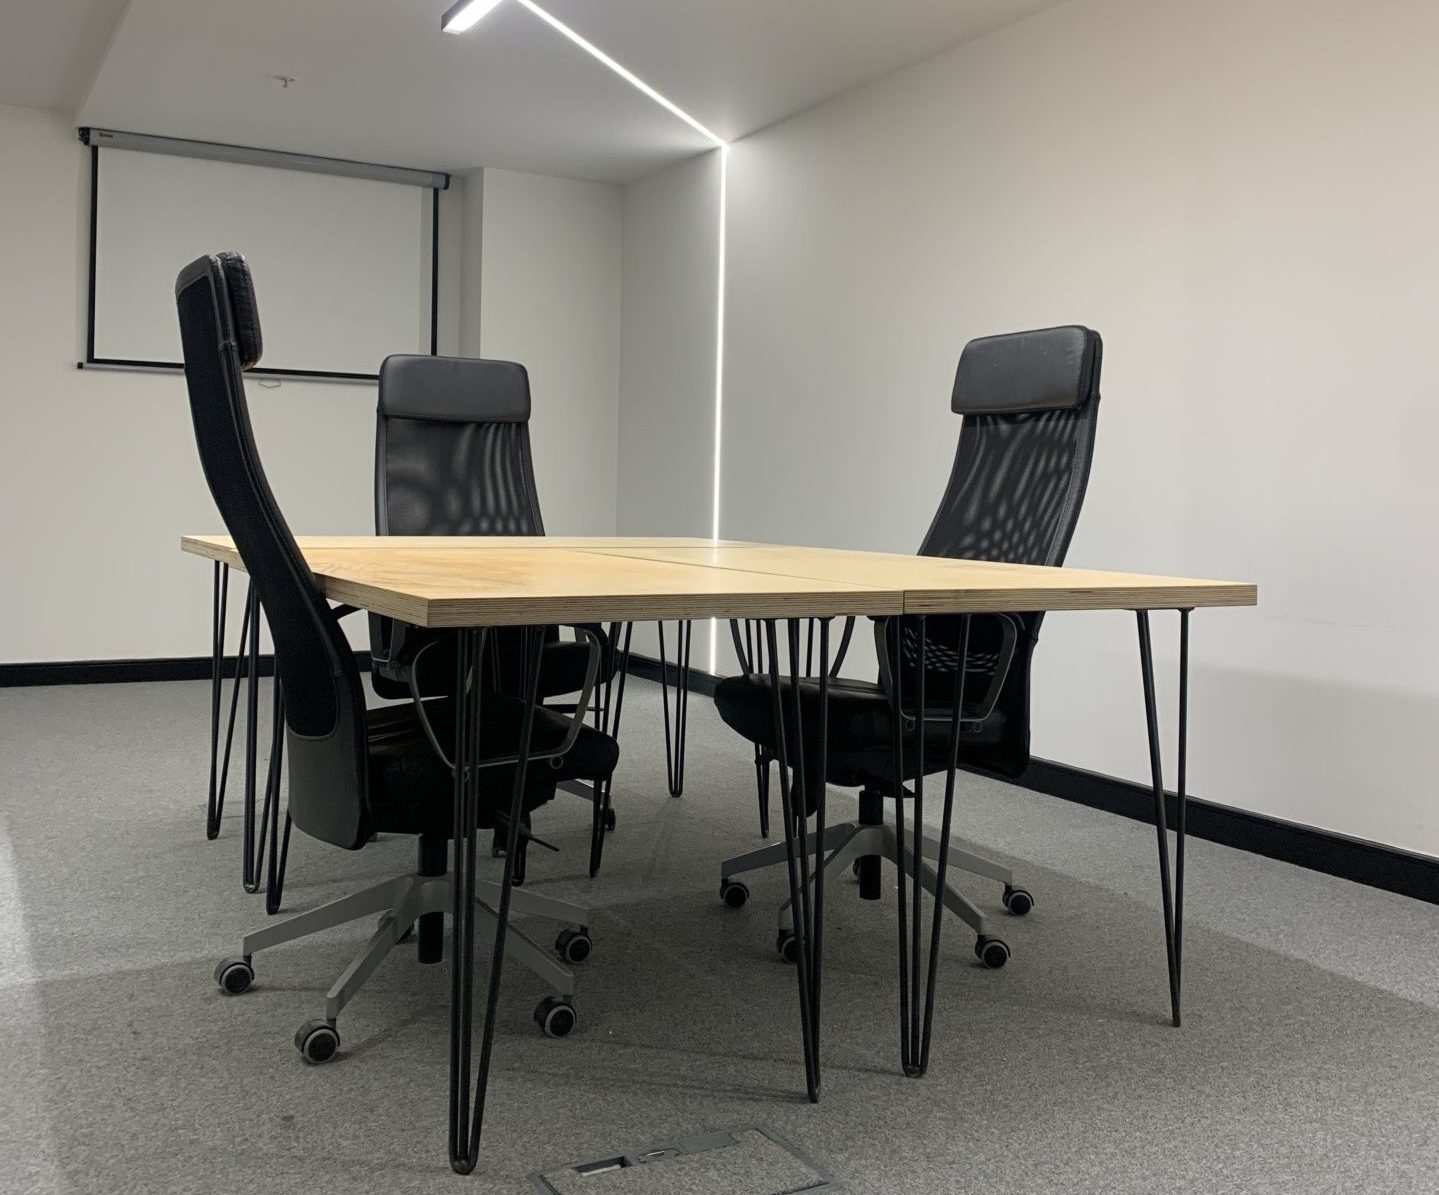 Why Rent a Meeting Room in Sandyford